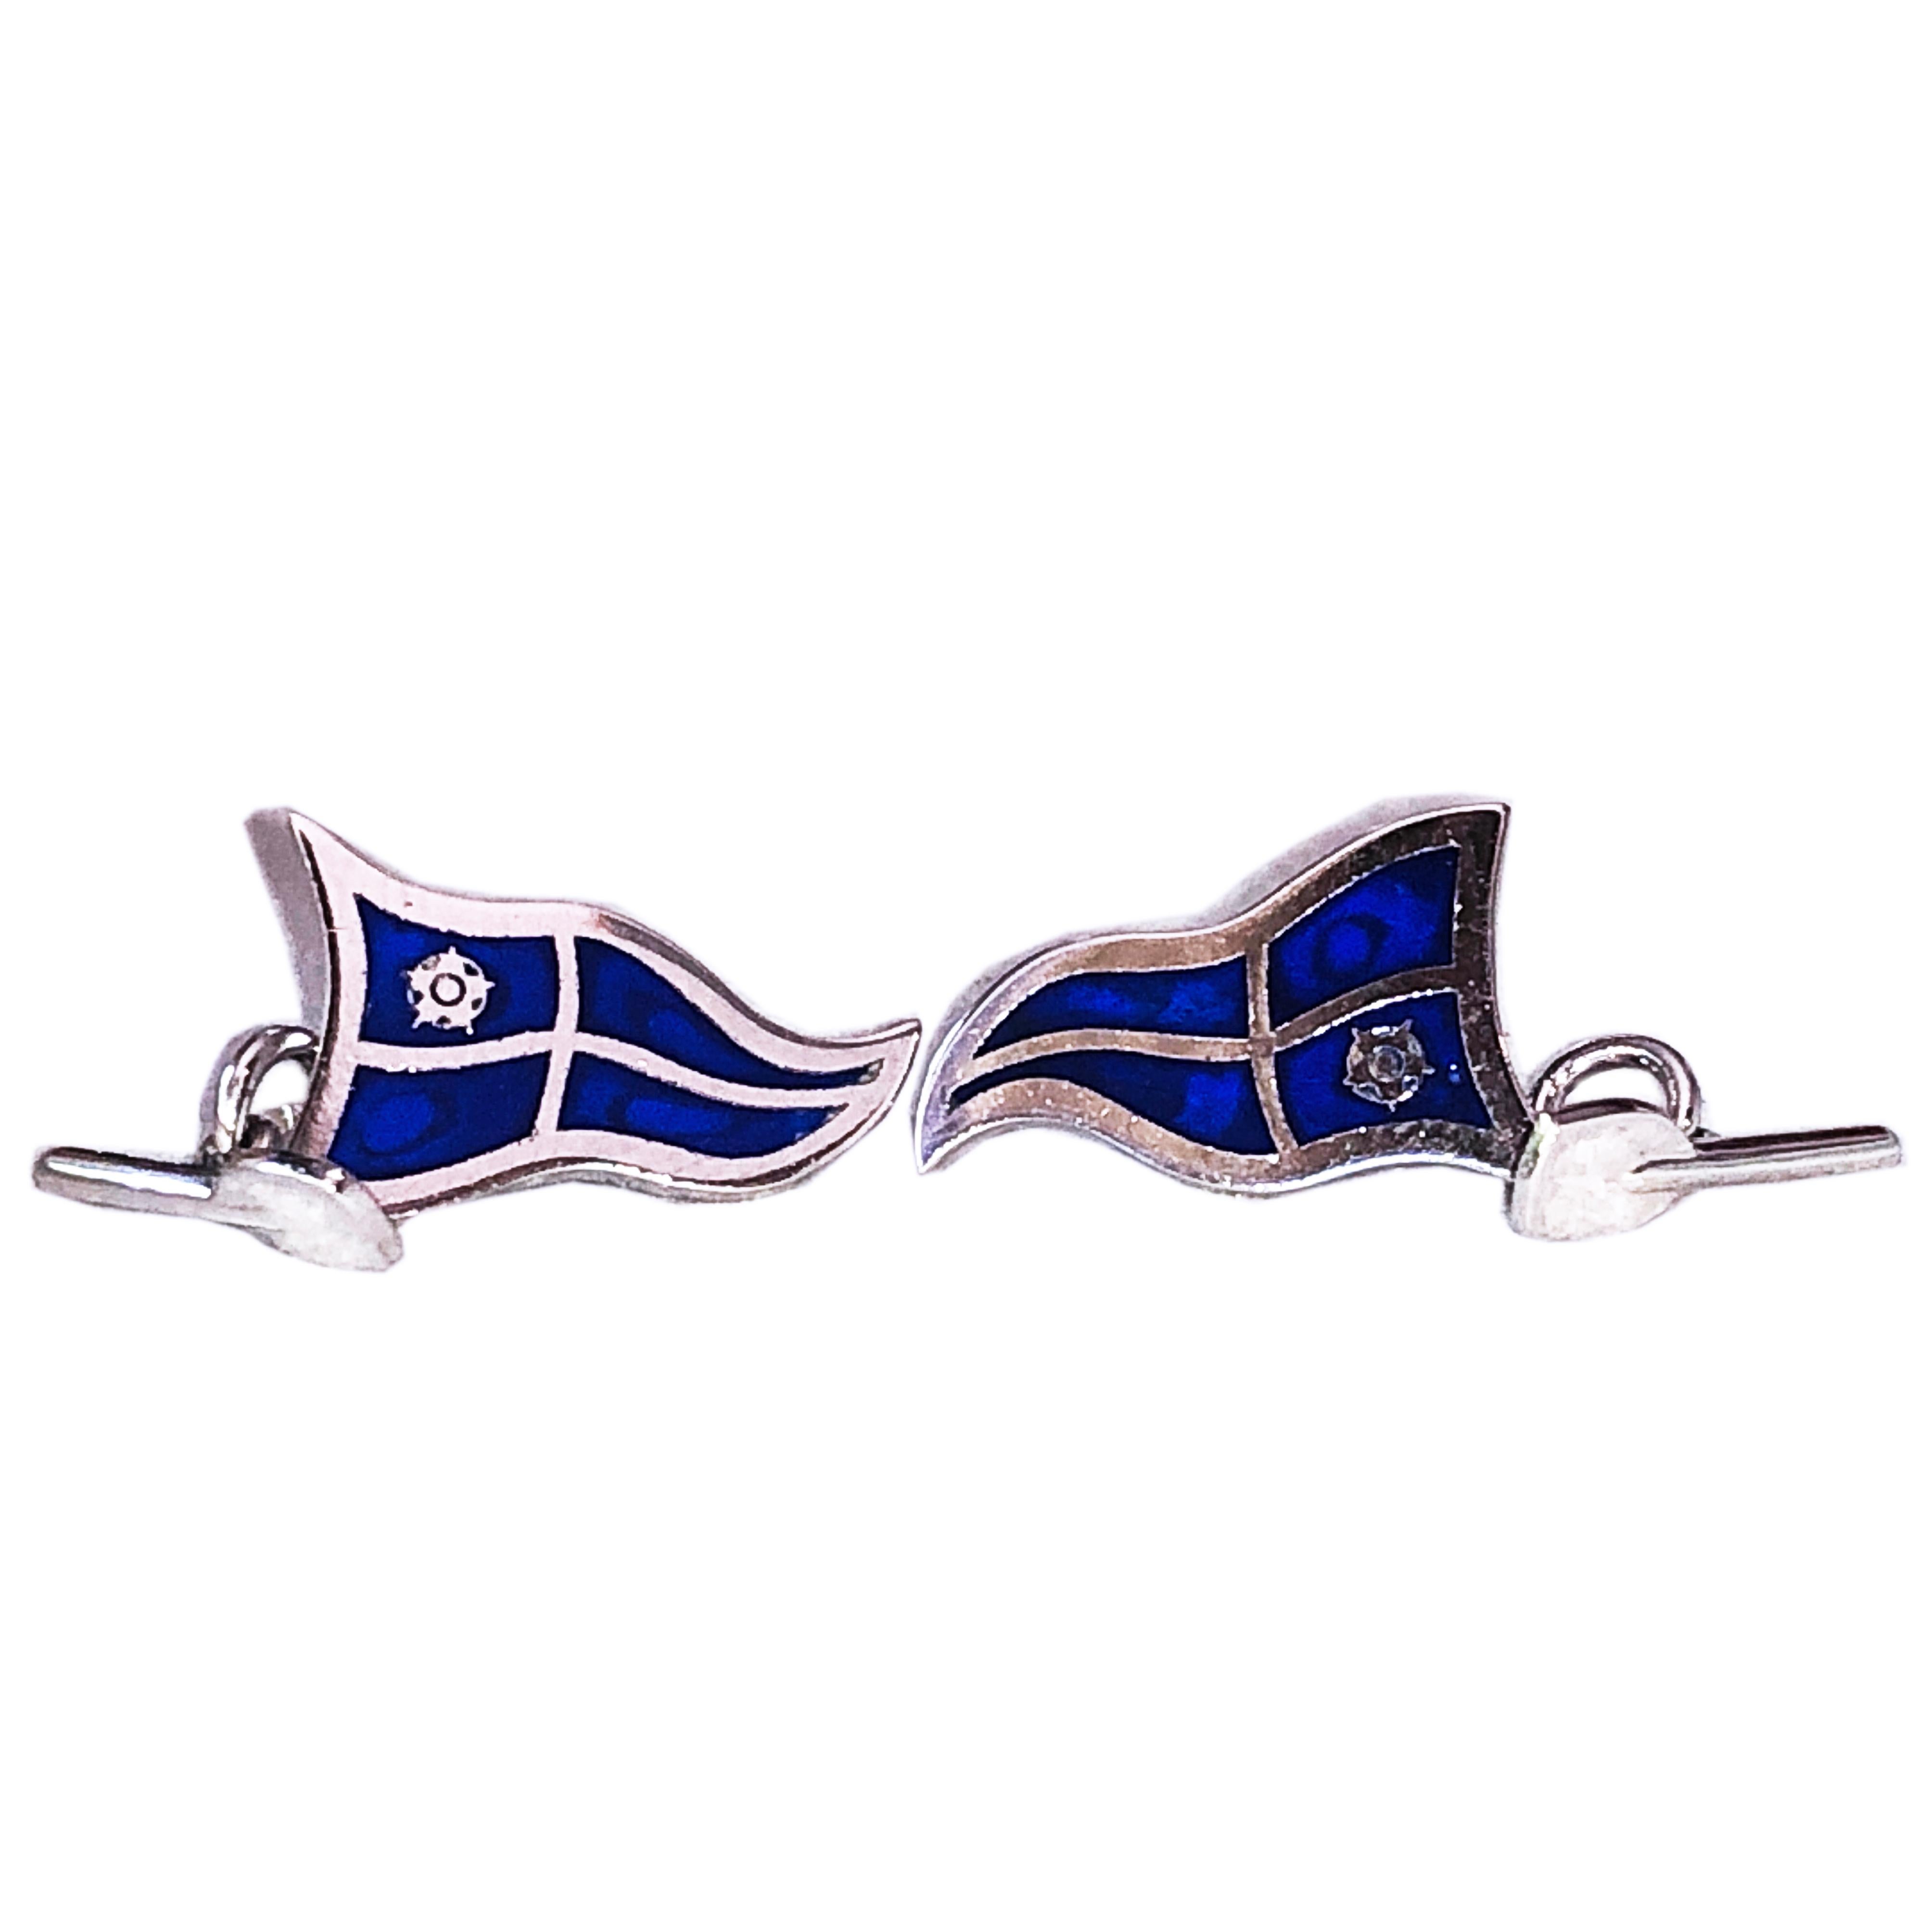 Unique, Chic yet Timeless, Navy Blue Hand Enameled Sailing Flag, Little Oar back, Sterling Silver Cufflinks.

In our smart fitted black box.